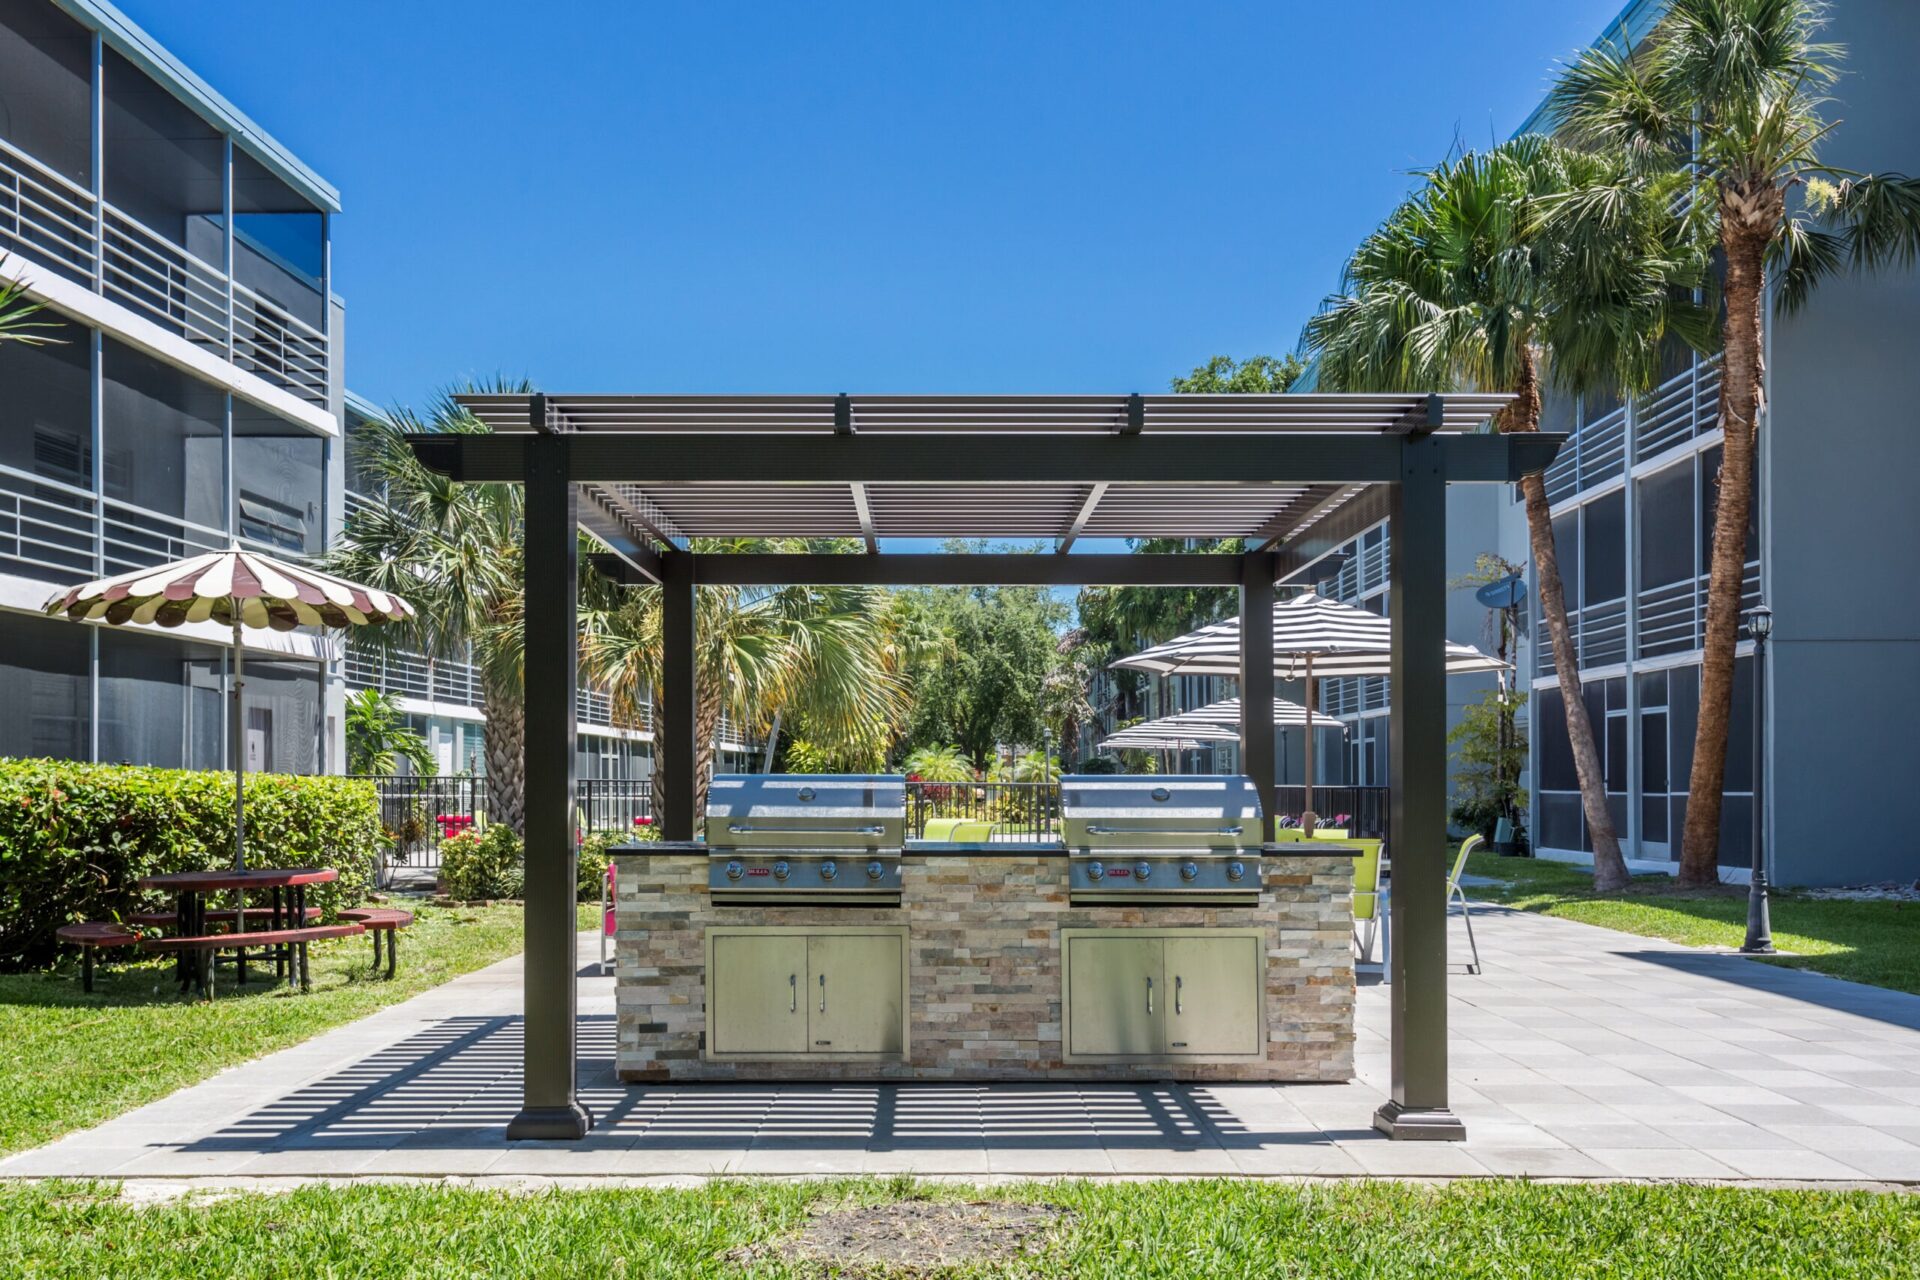 Aventura Oaks grilling station with two grills.